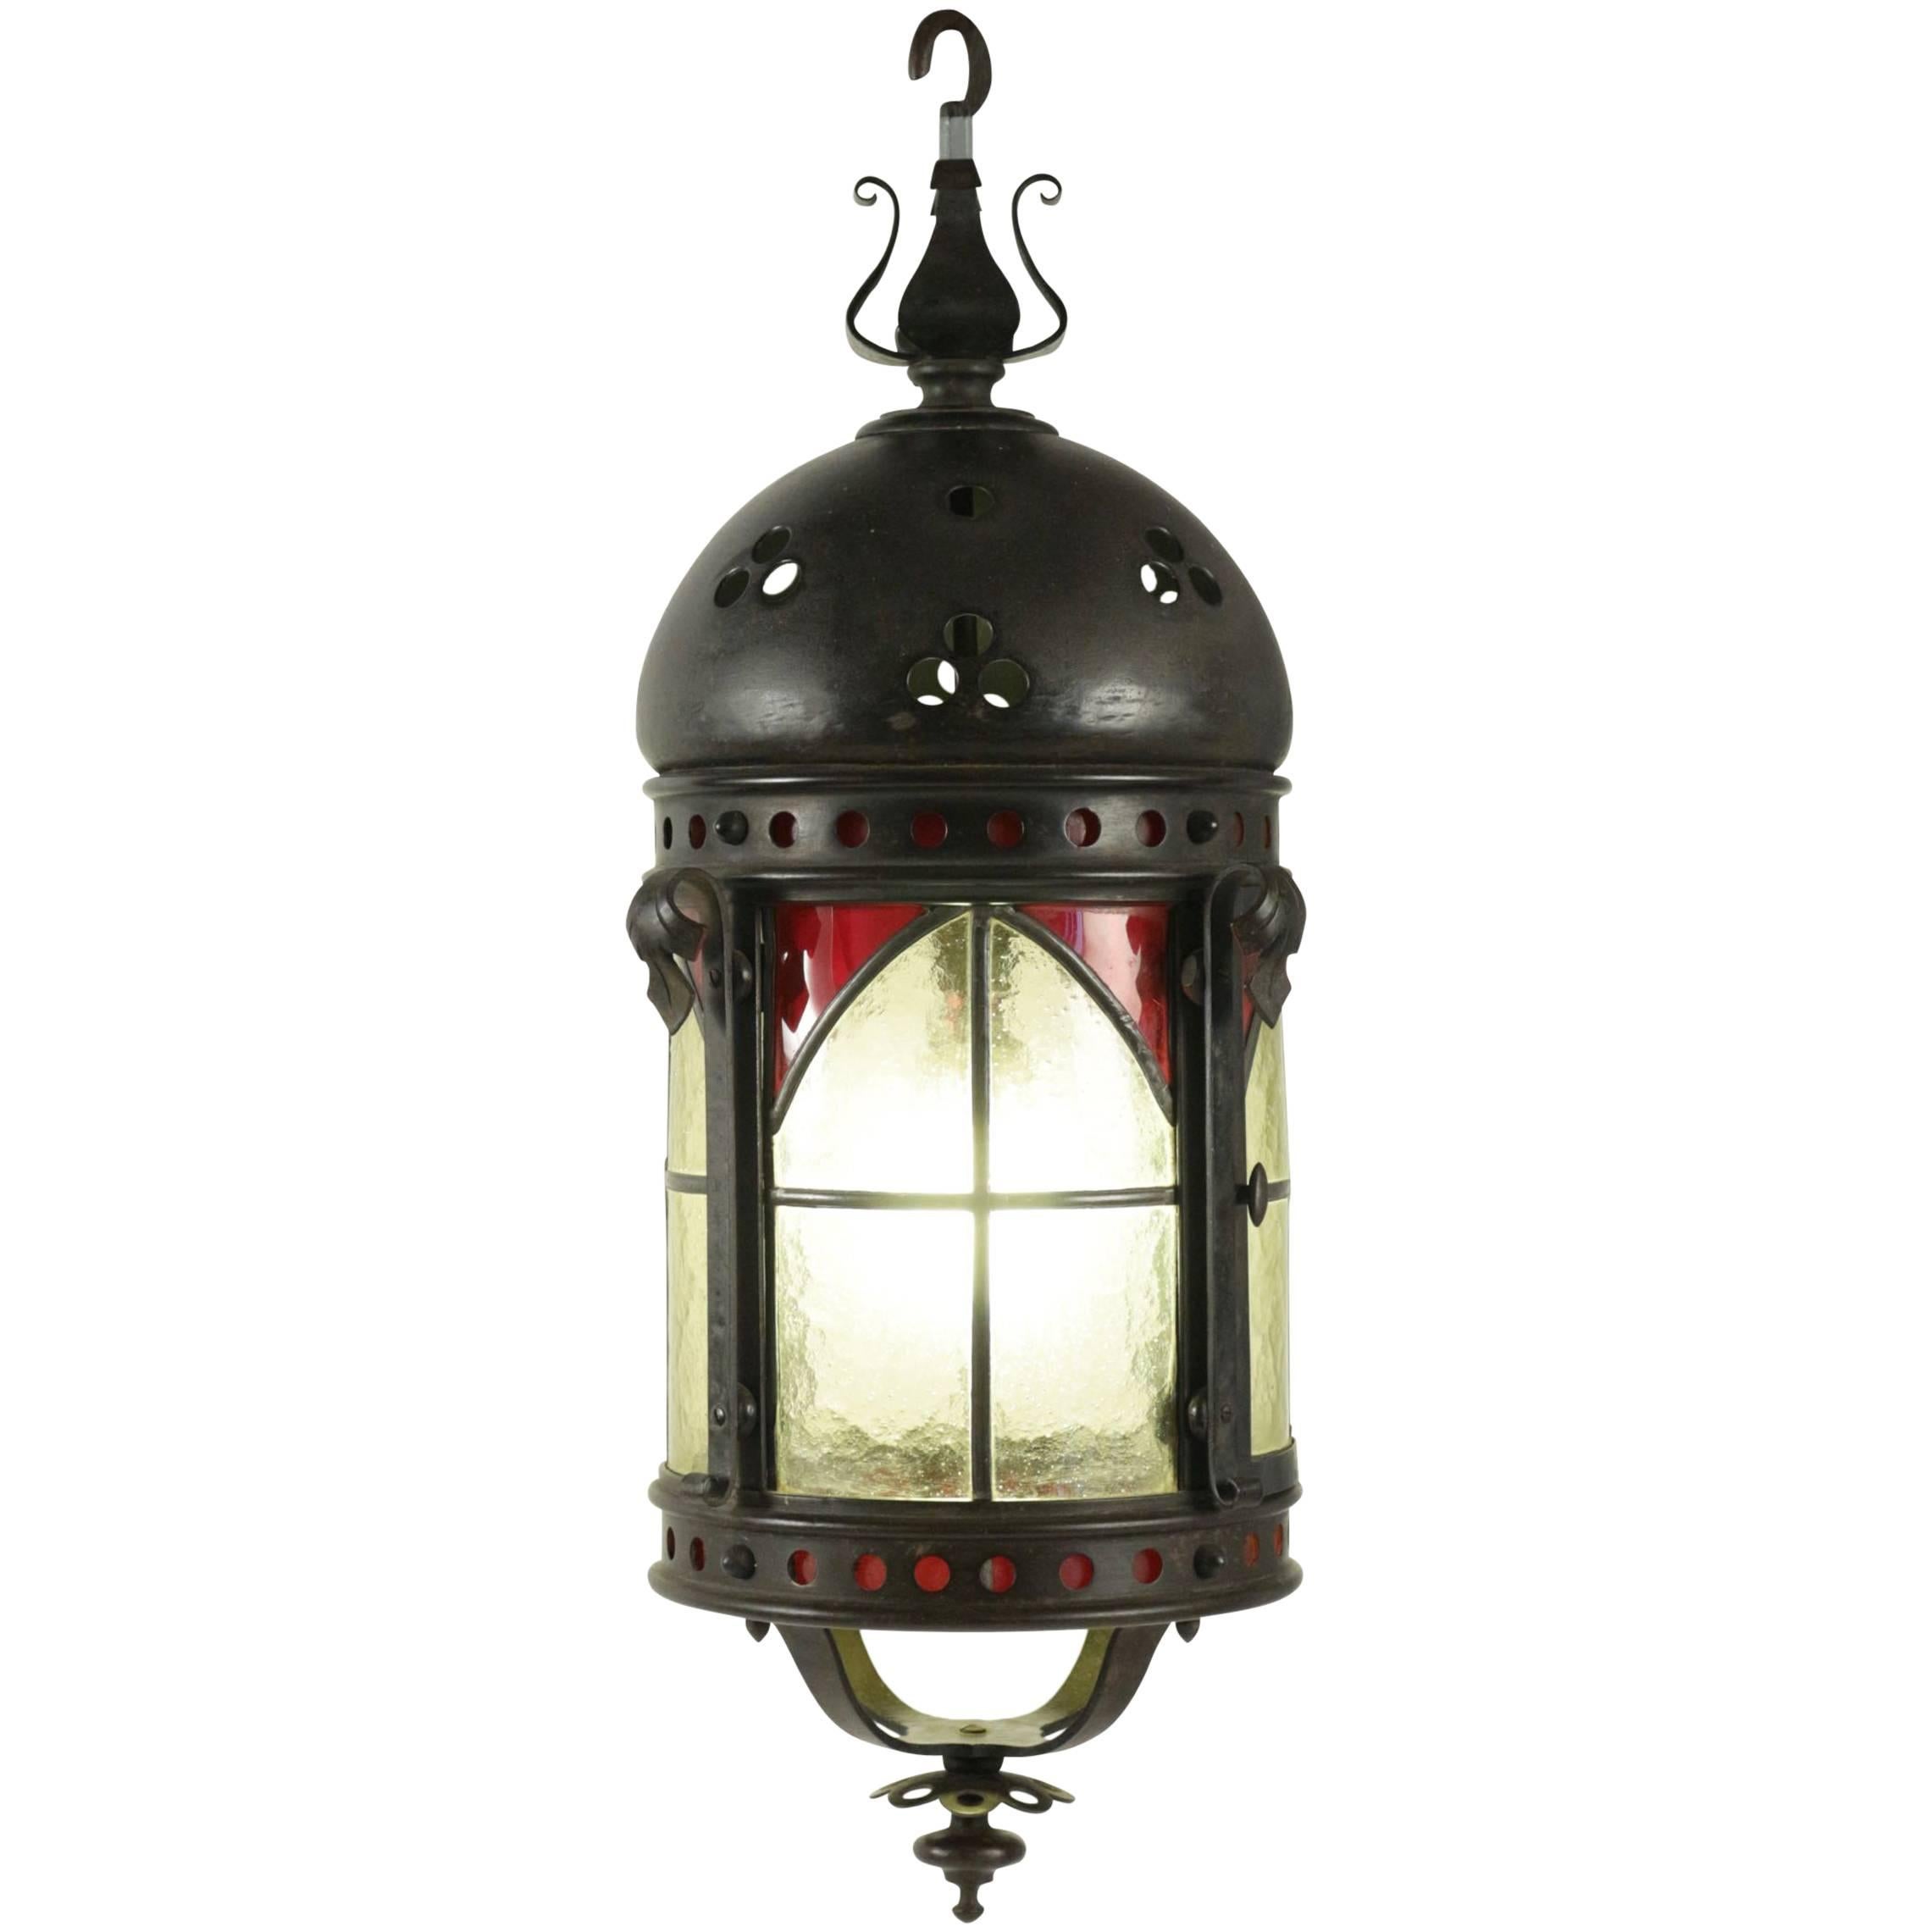 Gohic Single Light Lantern in Wrought Iron and Glass